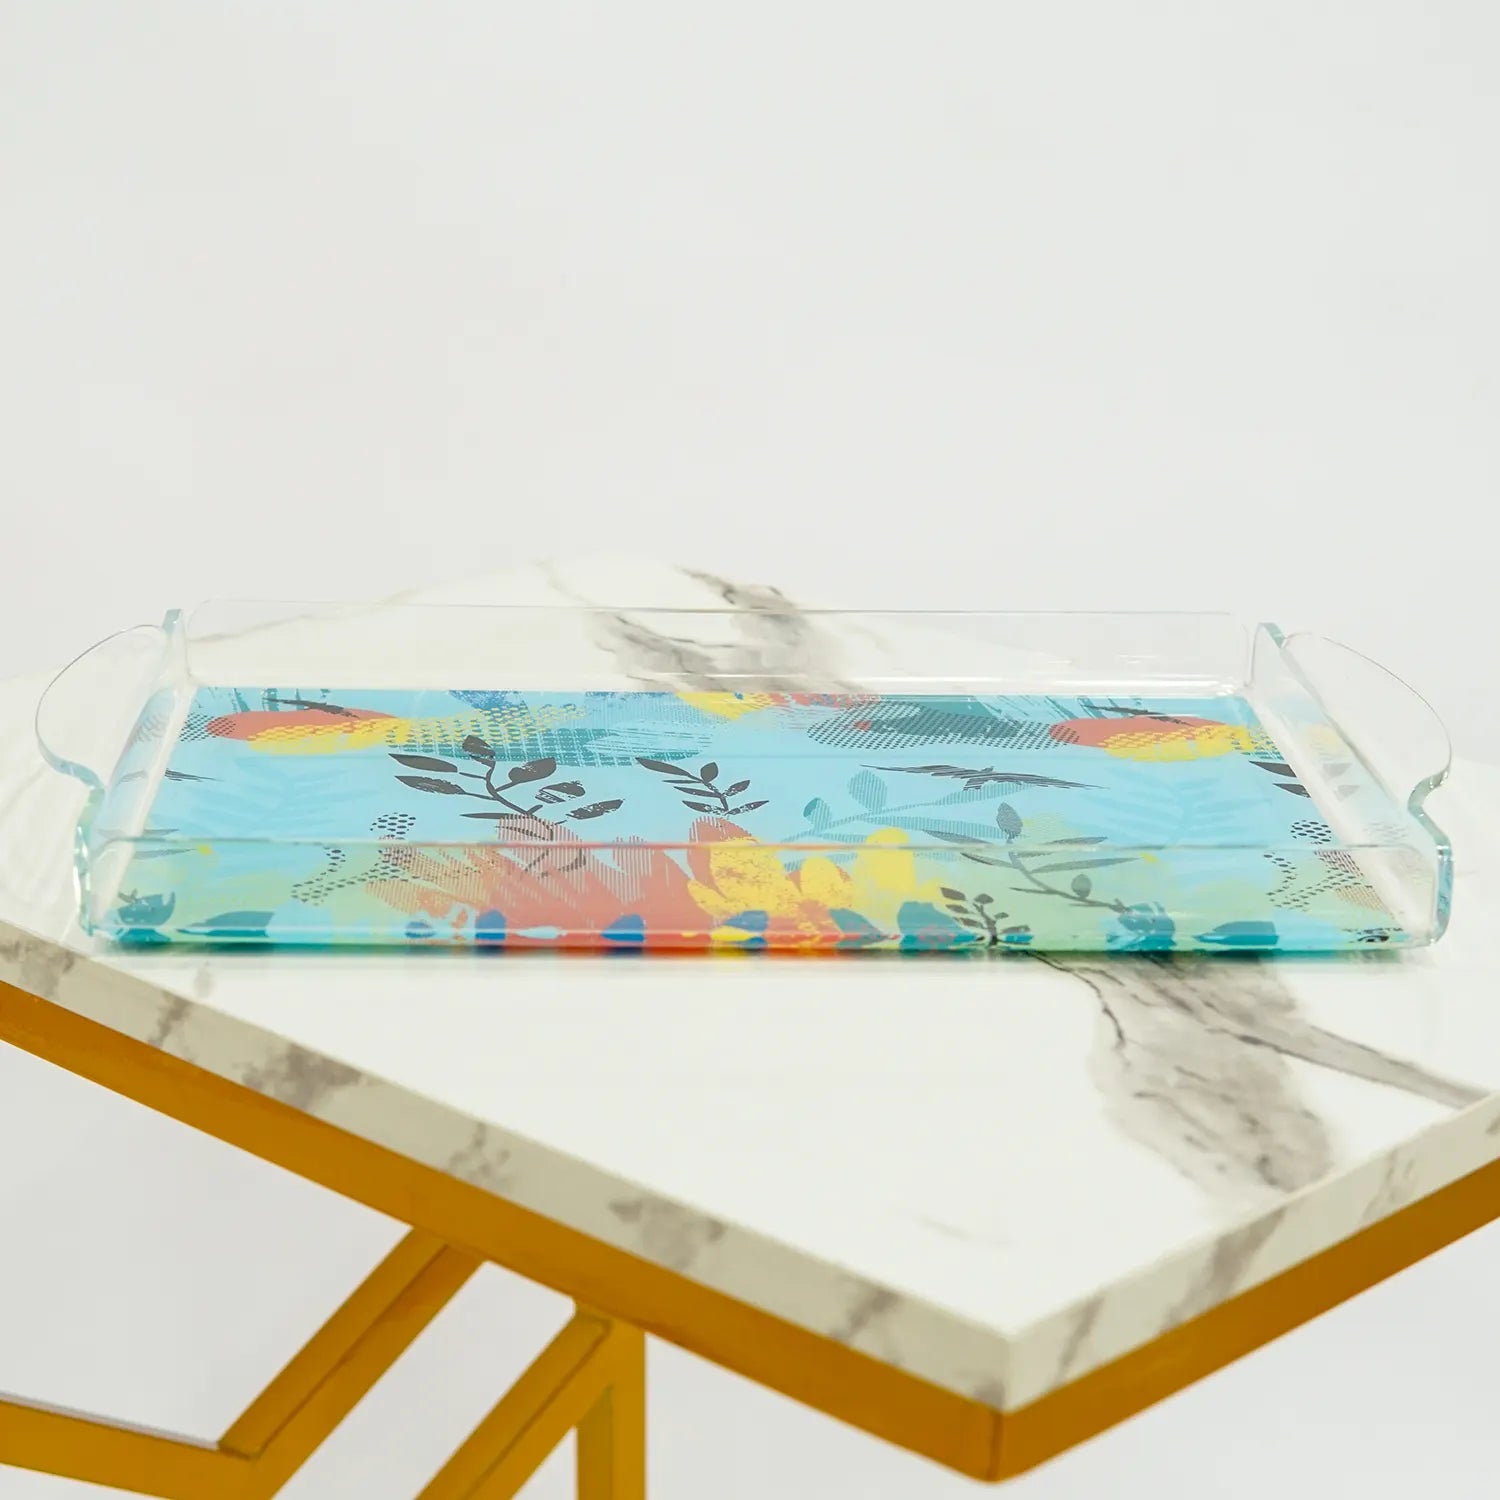 Elegance in Glass: High-Quality Tray with Beautiful Floral Design